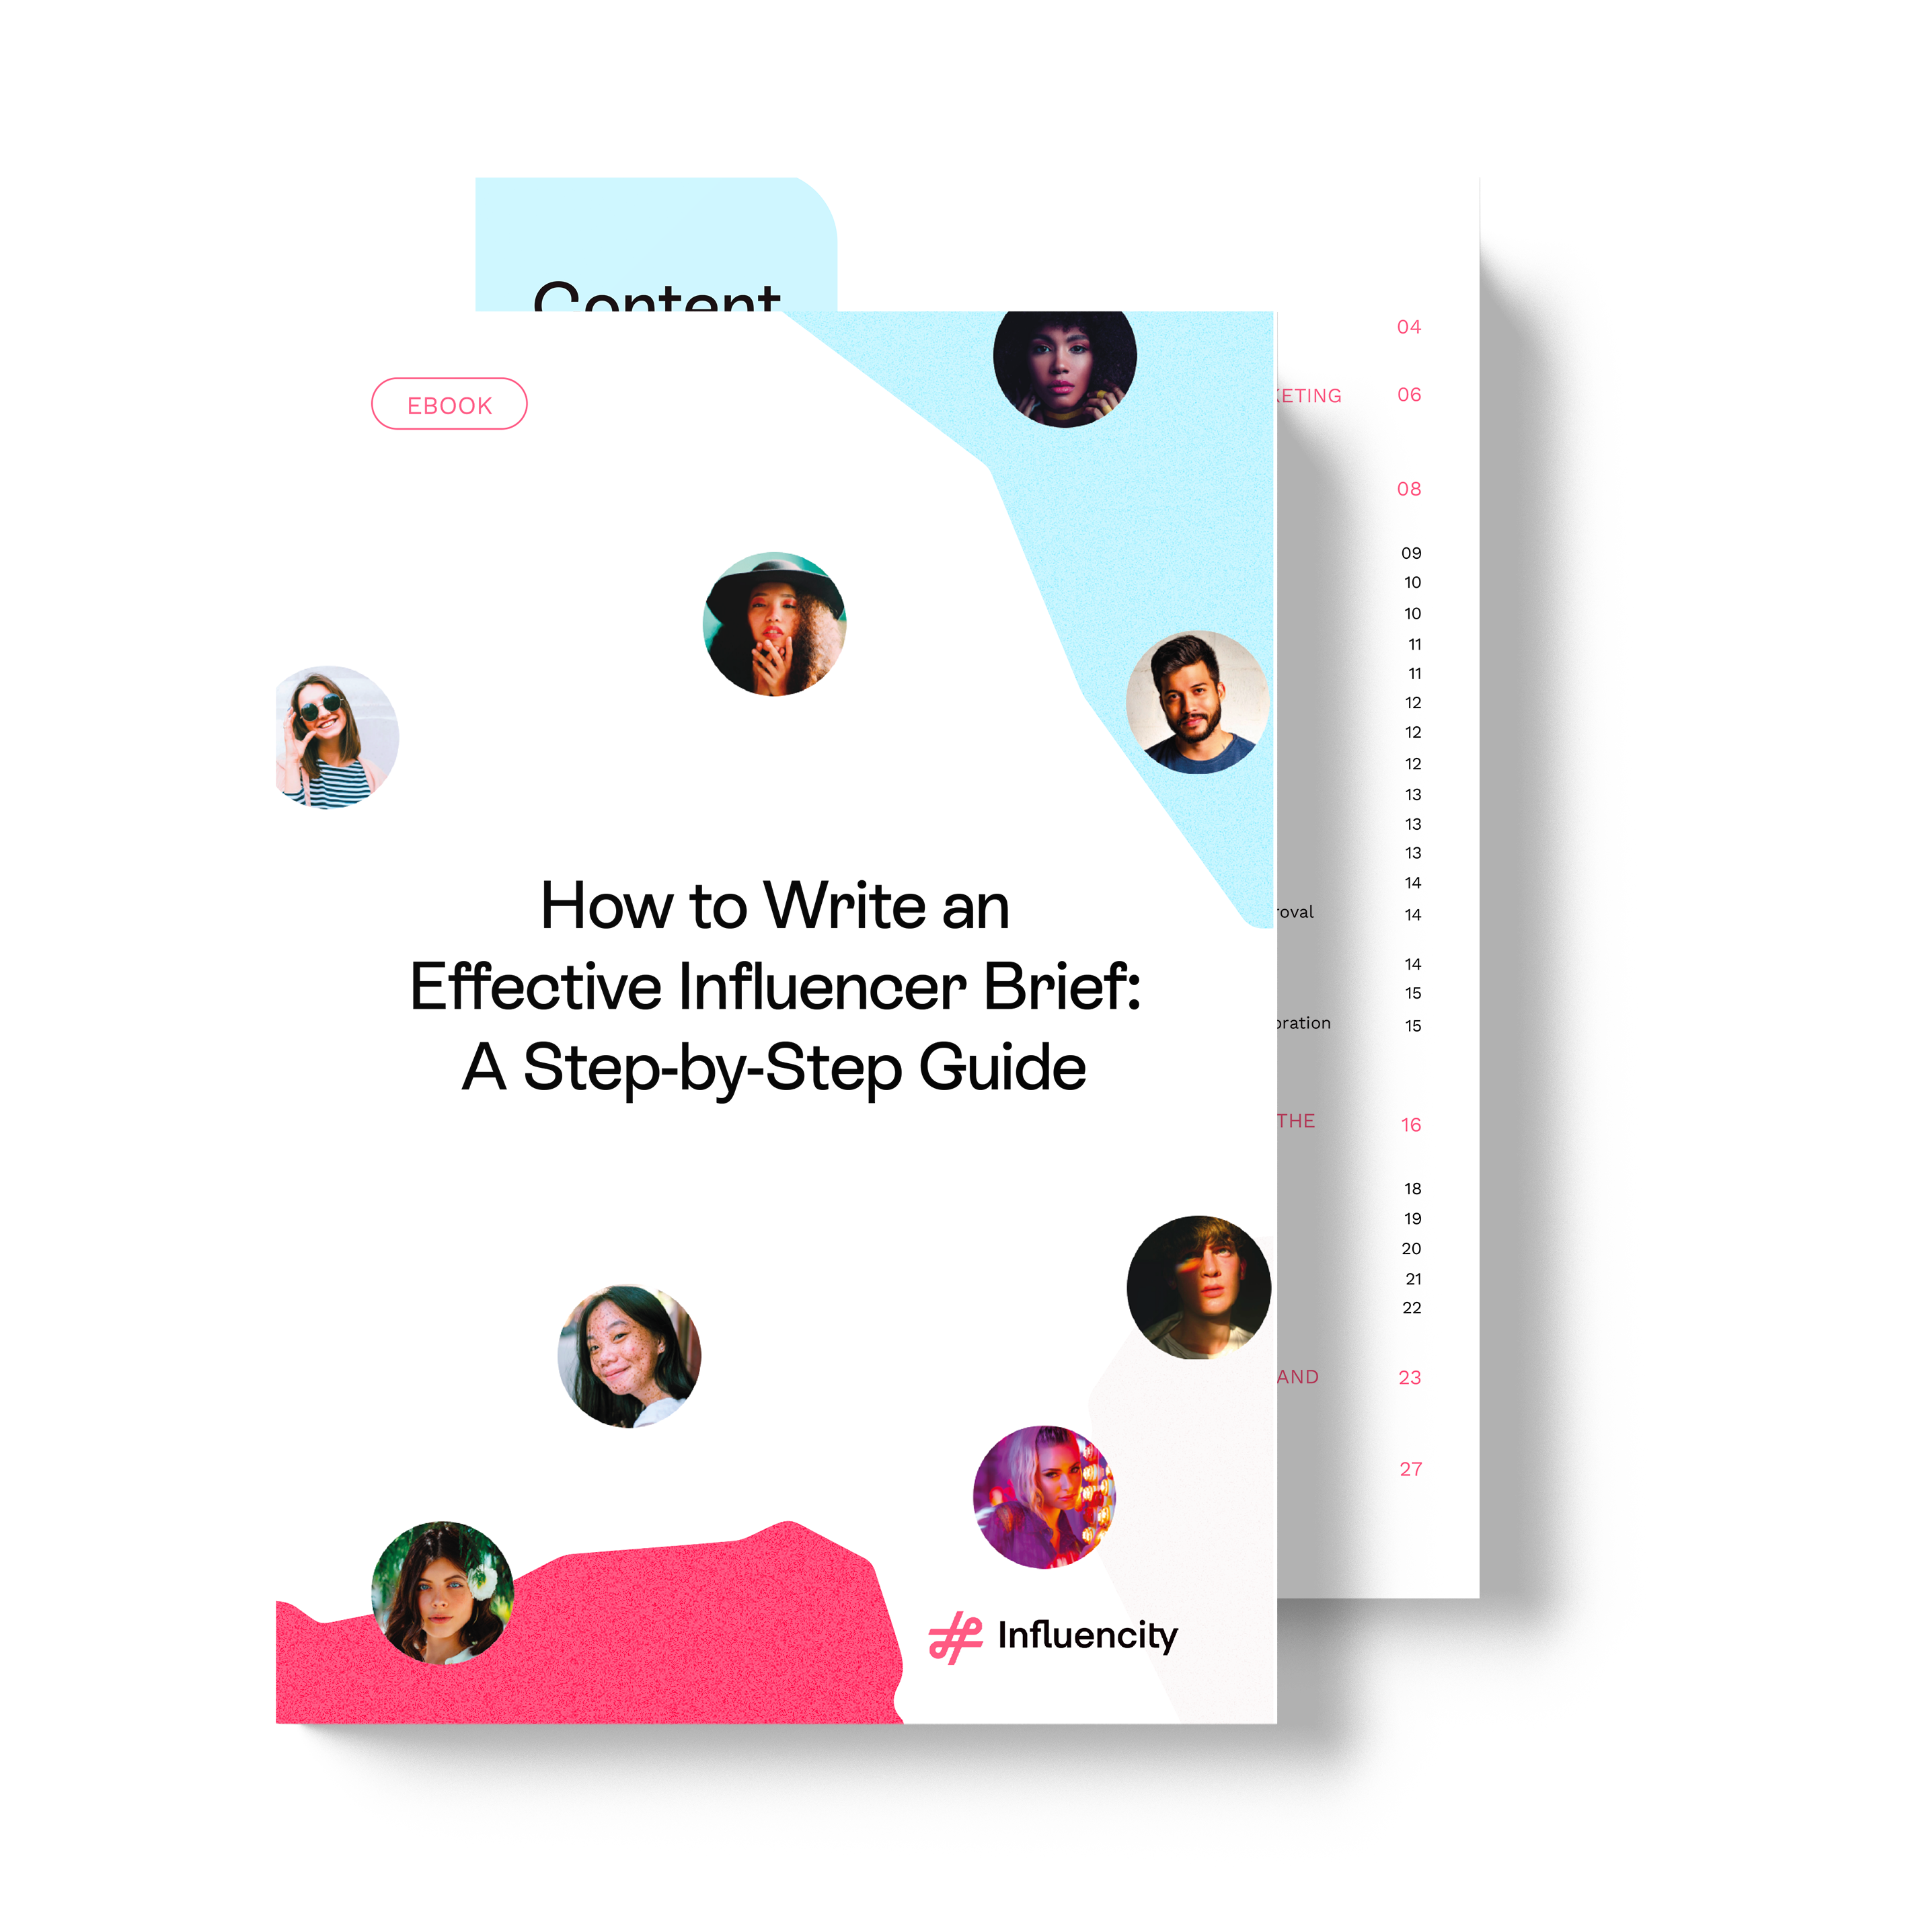 mockup_ebook_How to Write an Effective Influencer Brief